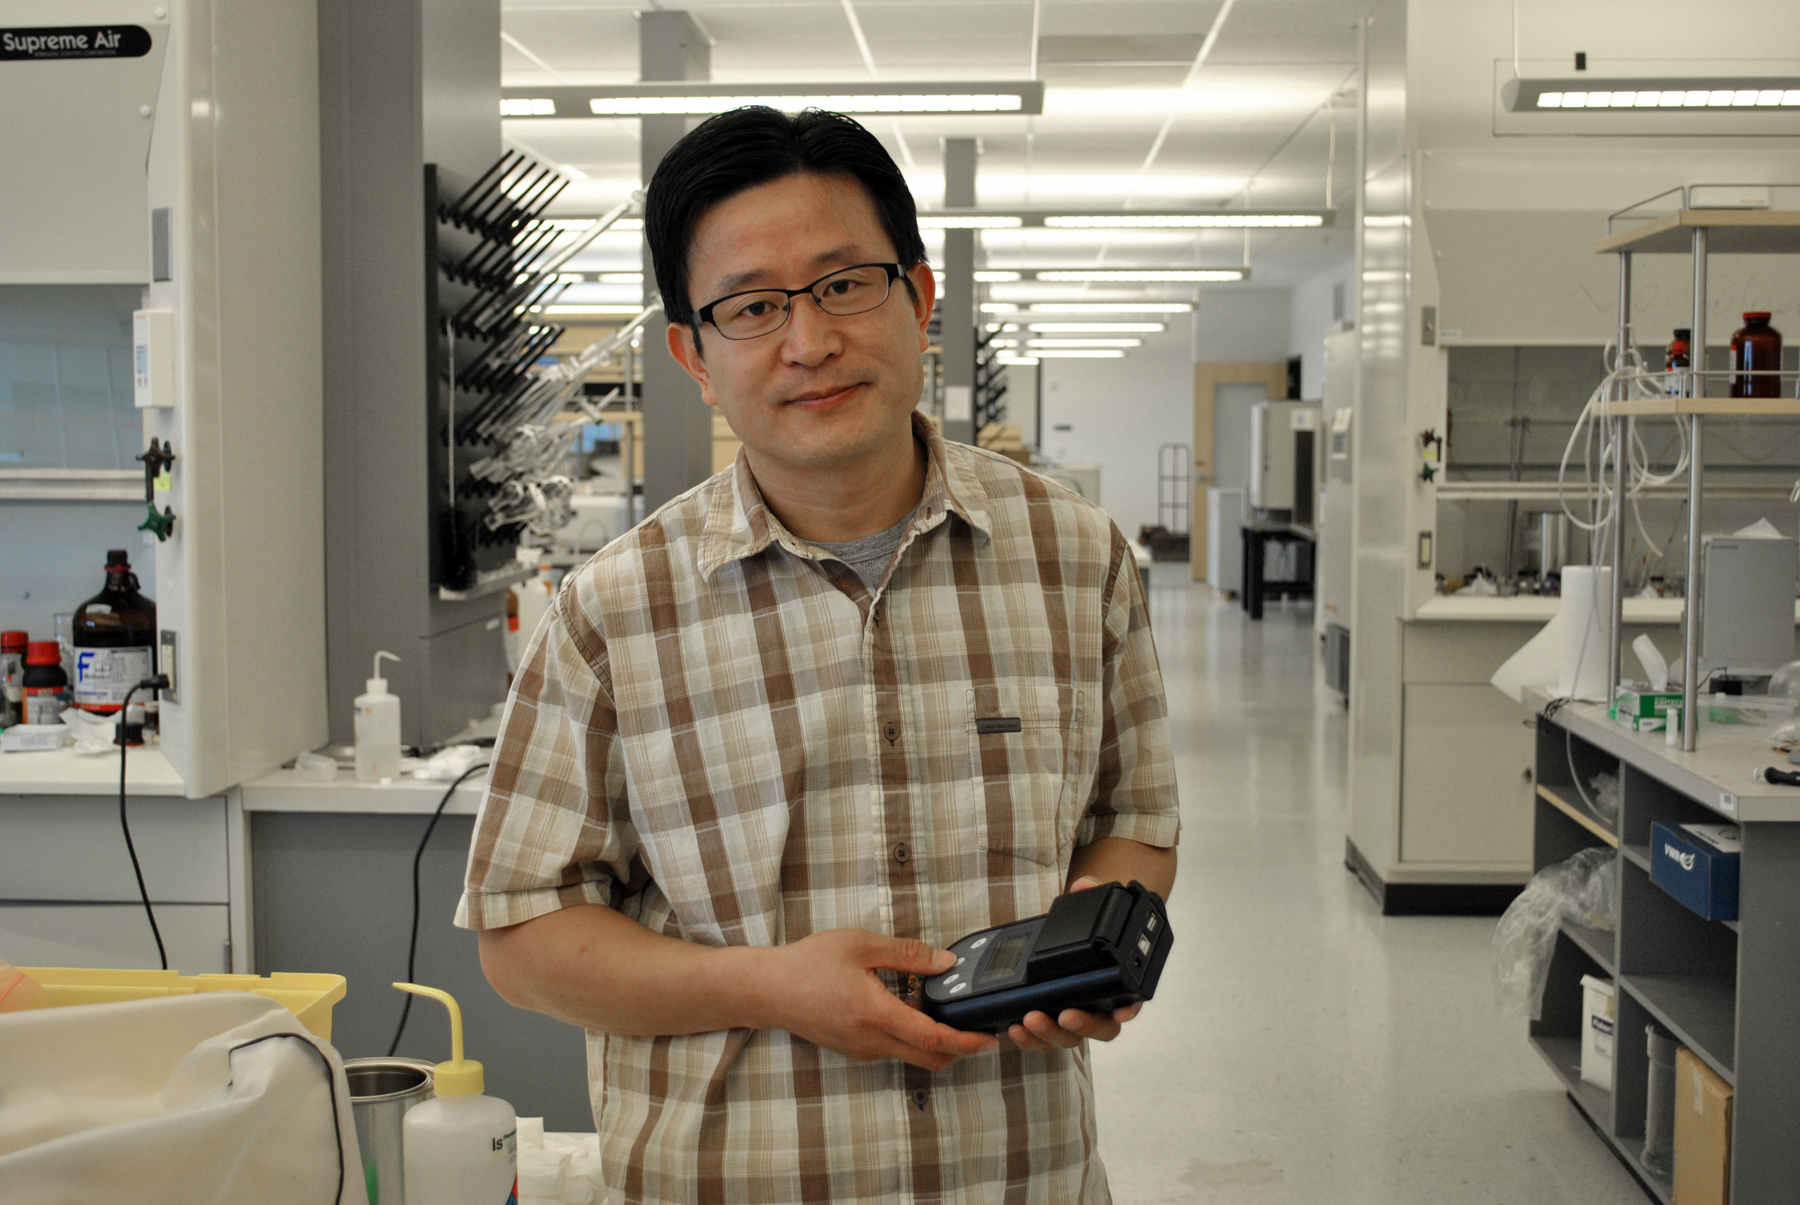 Ling Zang, USTAR Professor of Nanotechnology at the University of Utah, is developing a new way to detect mercury. He is one of many faculty members developing innovative technologies that are available for licensing and commercial development.